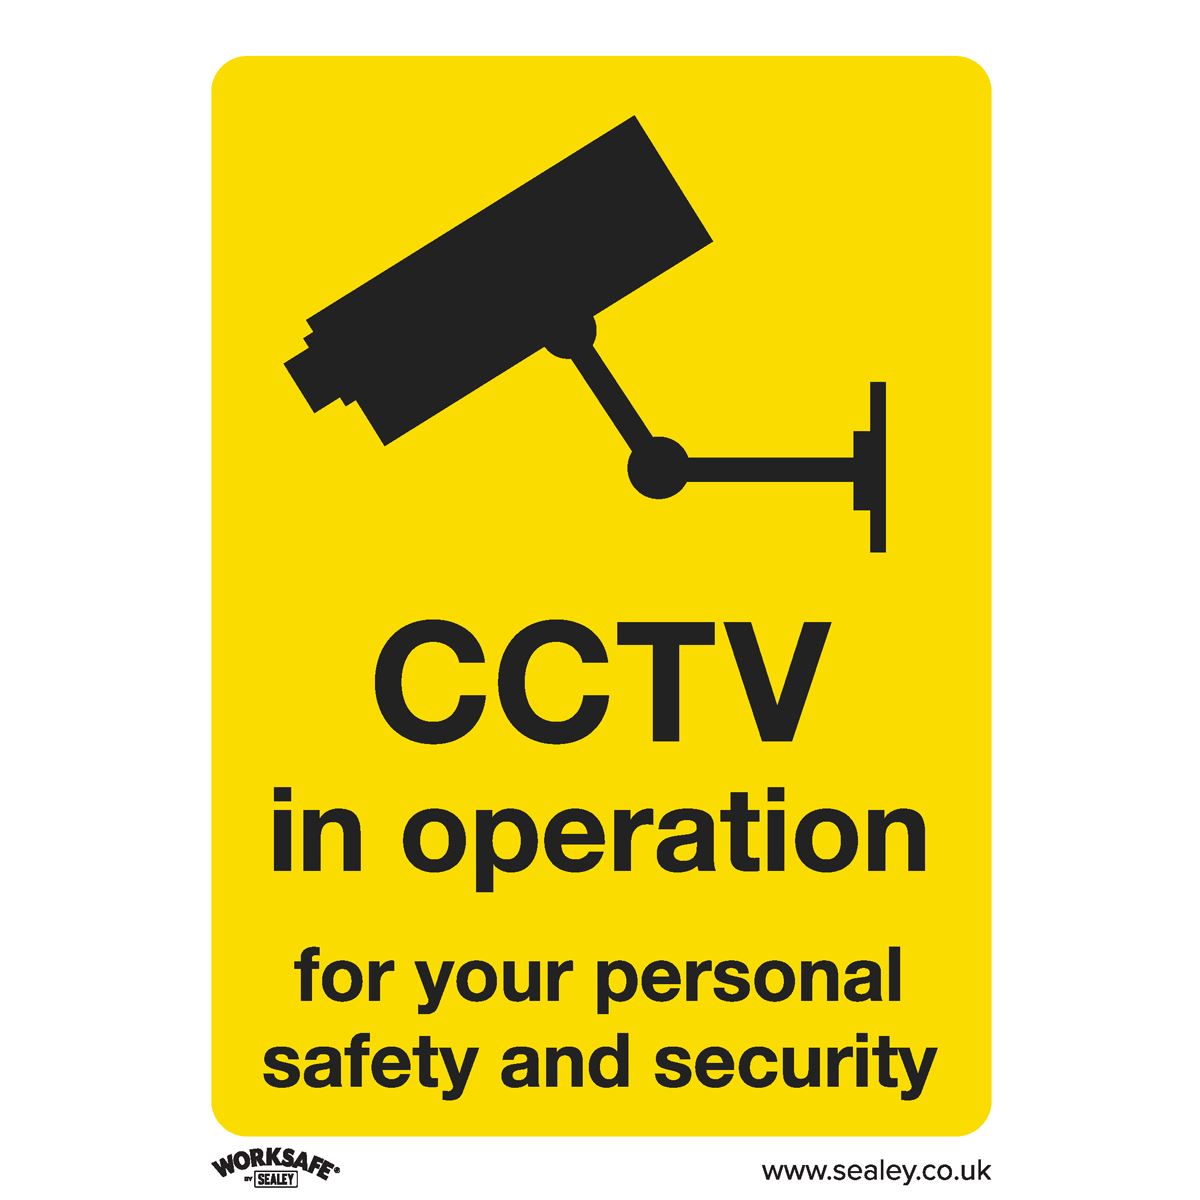 Worksafe by Sealey Warning Safety Sign - CCTV - Self-Adhesive Vinyl